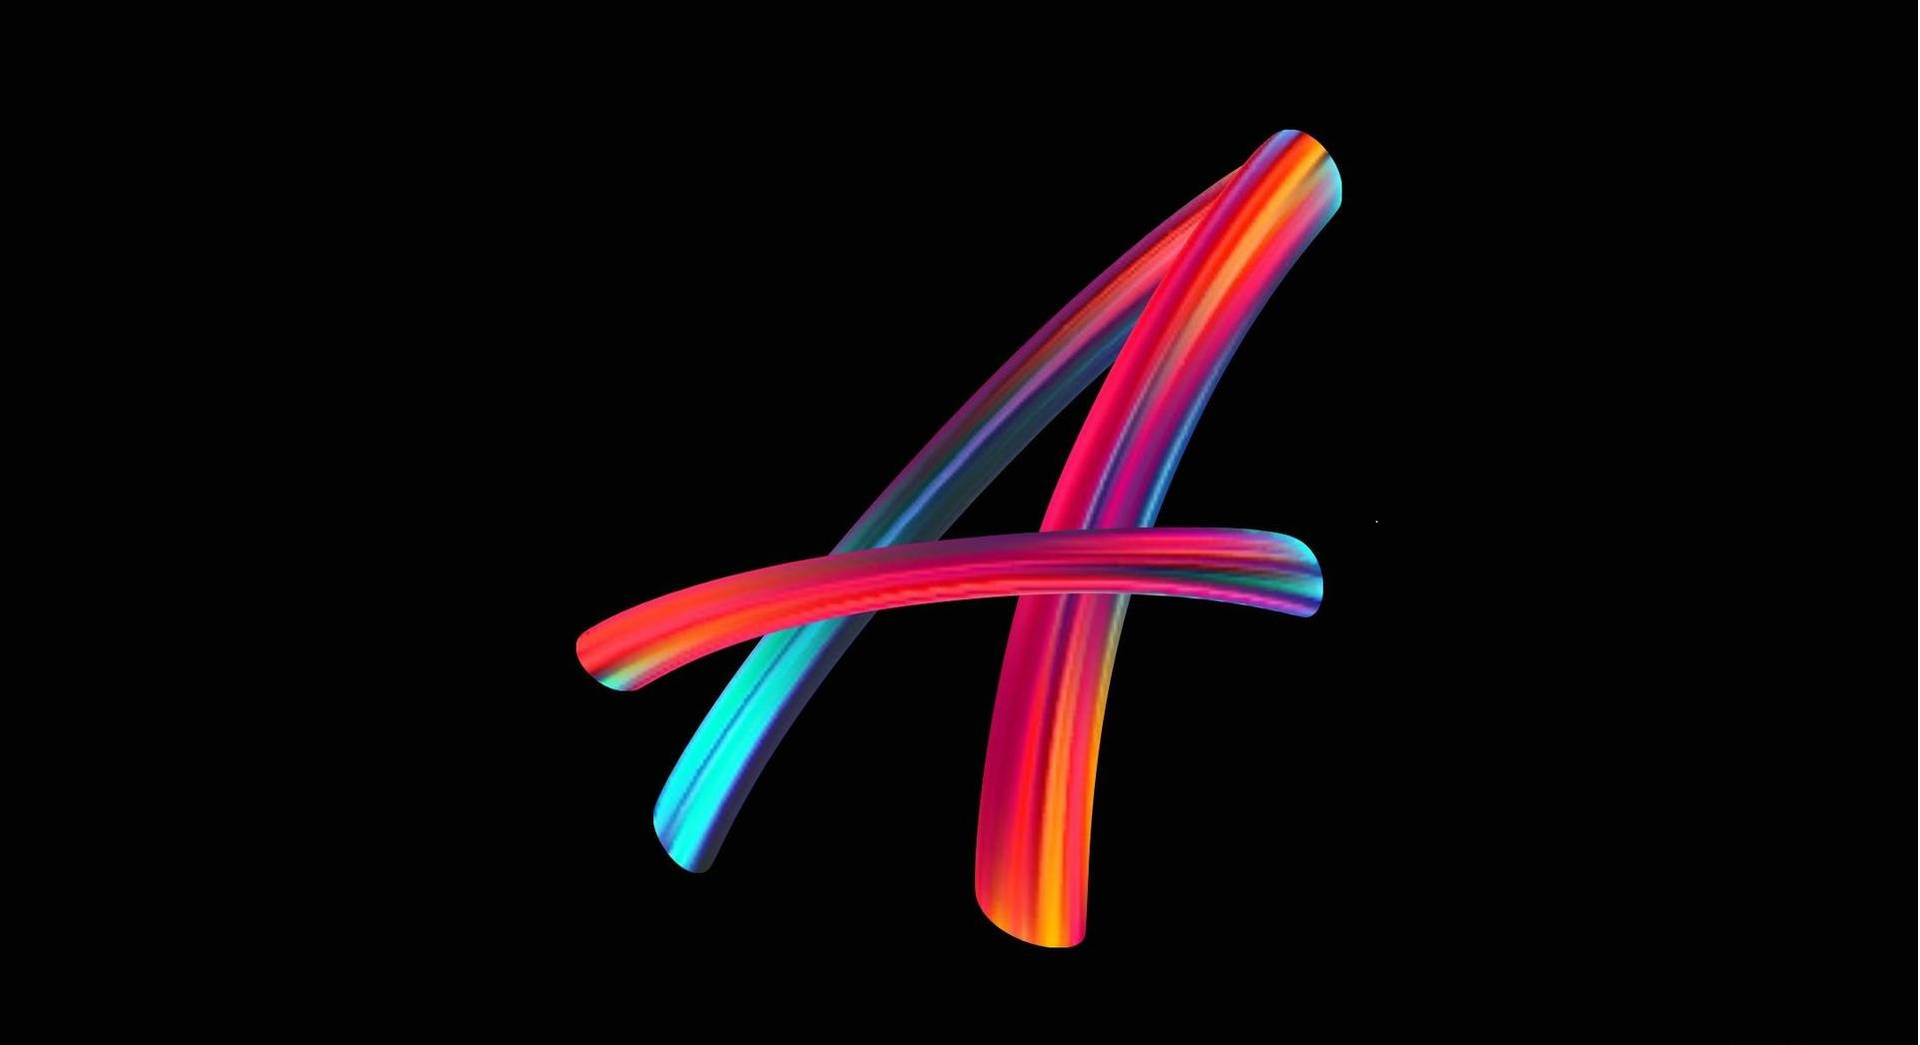 Aesthetic Letter A In Black Background